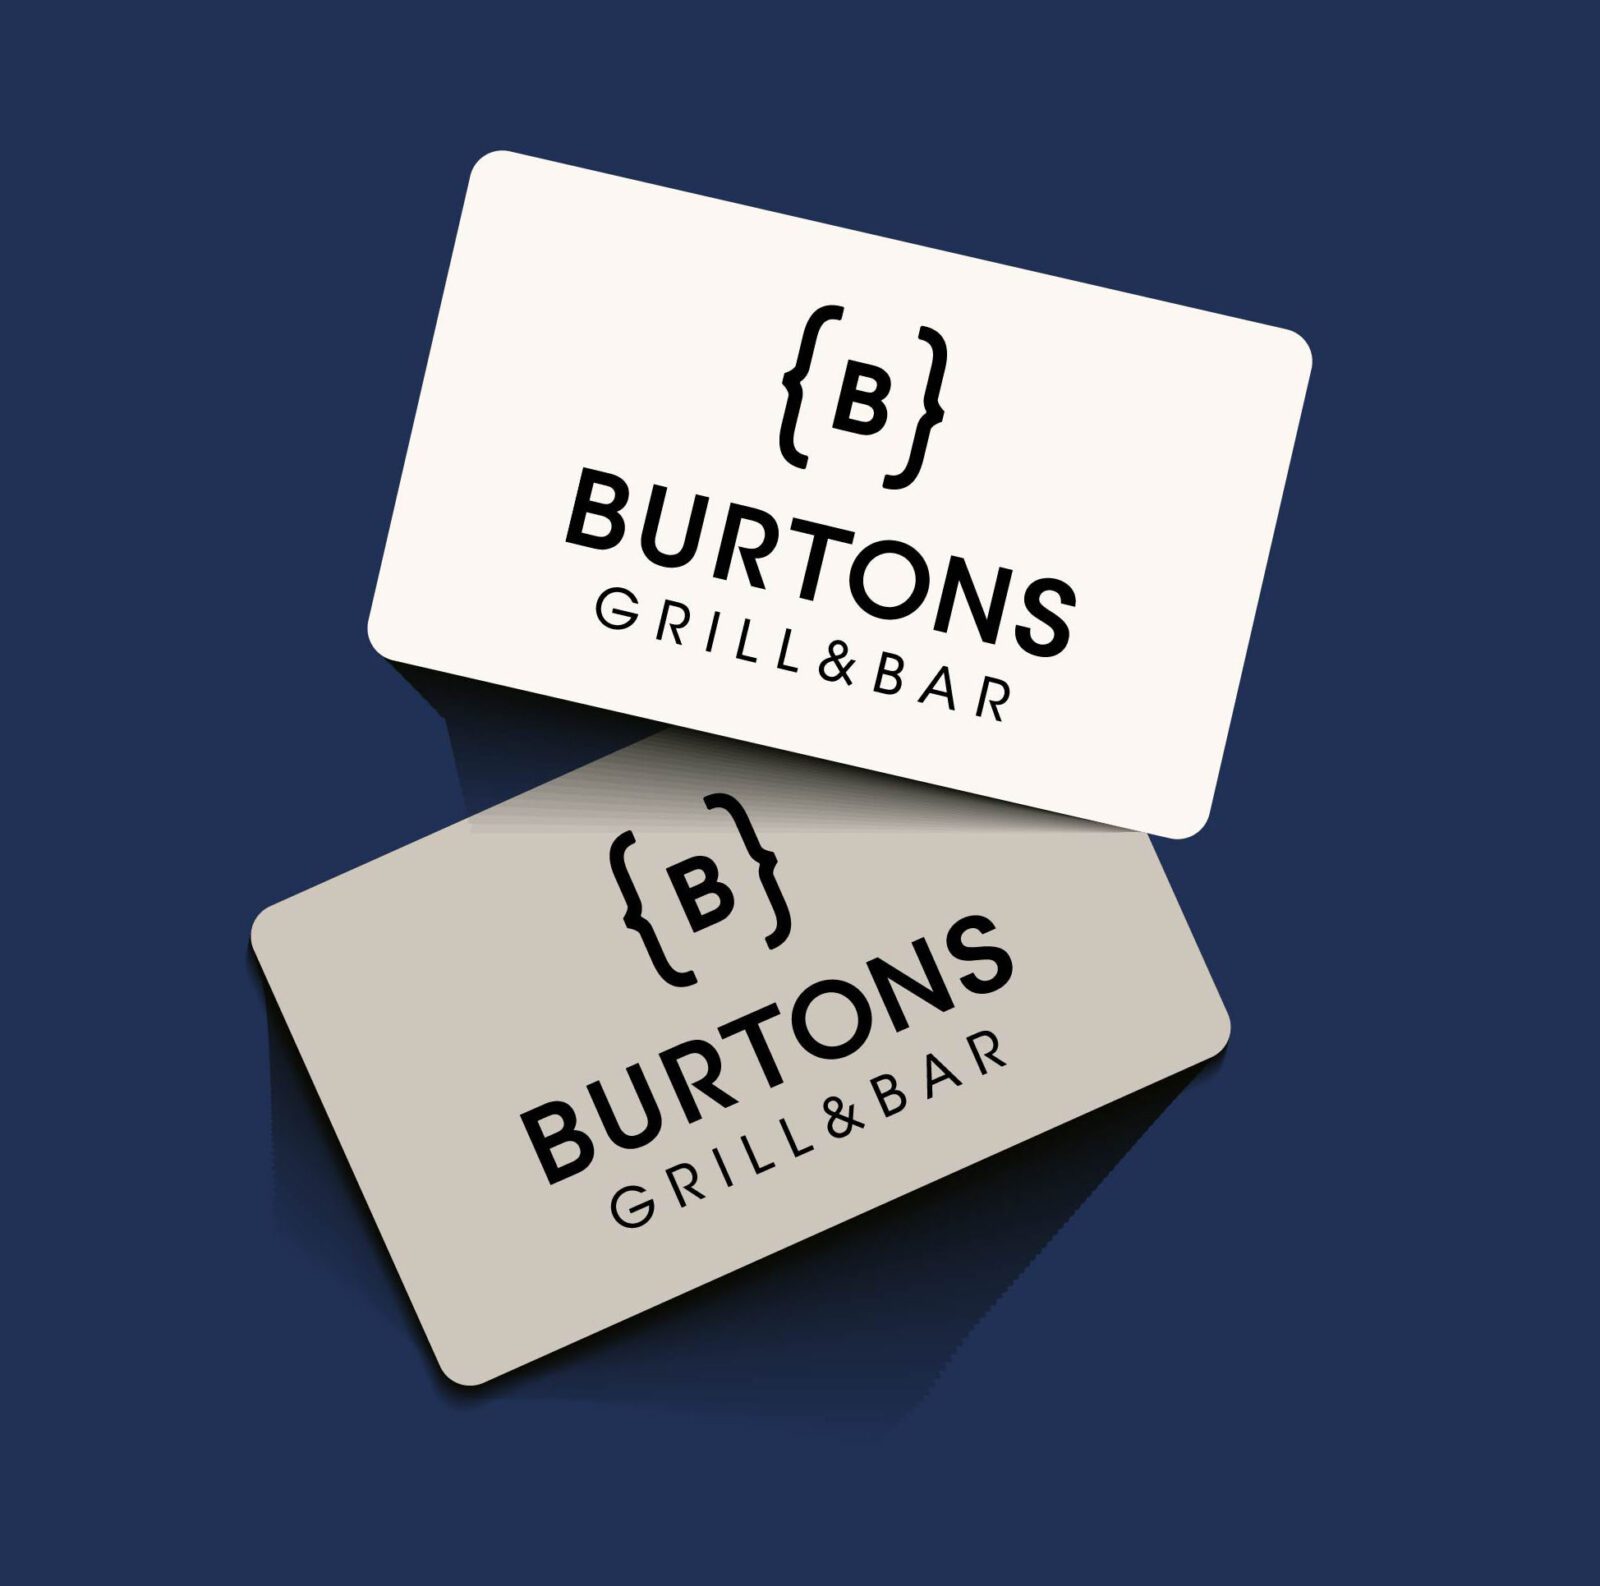 Two Burtons Grill gift cards on a blue background